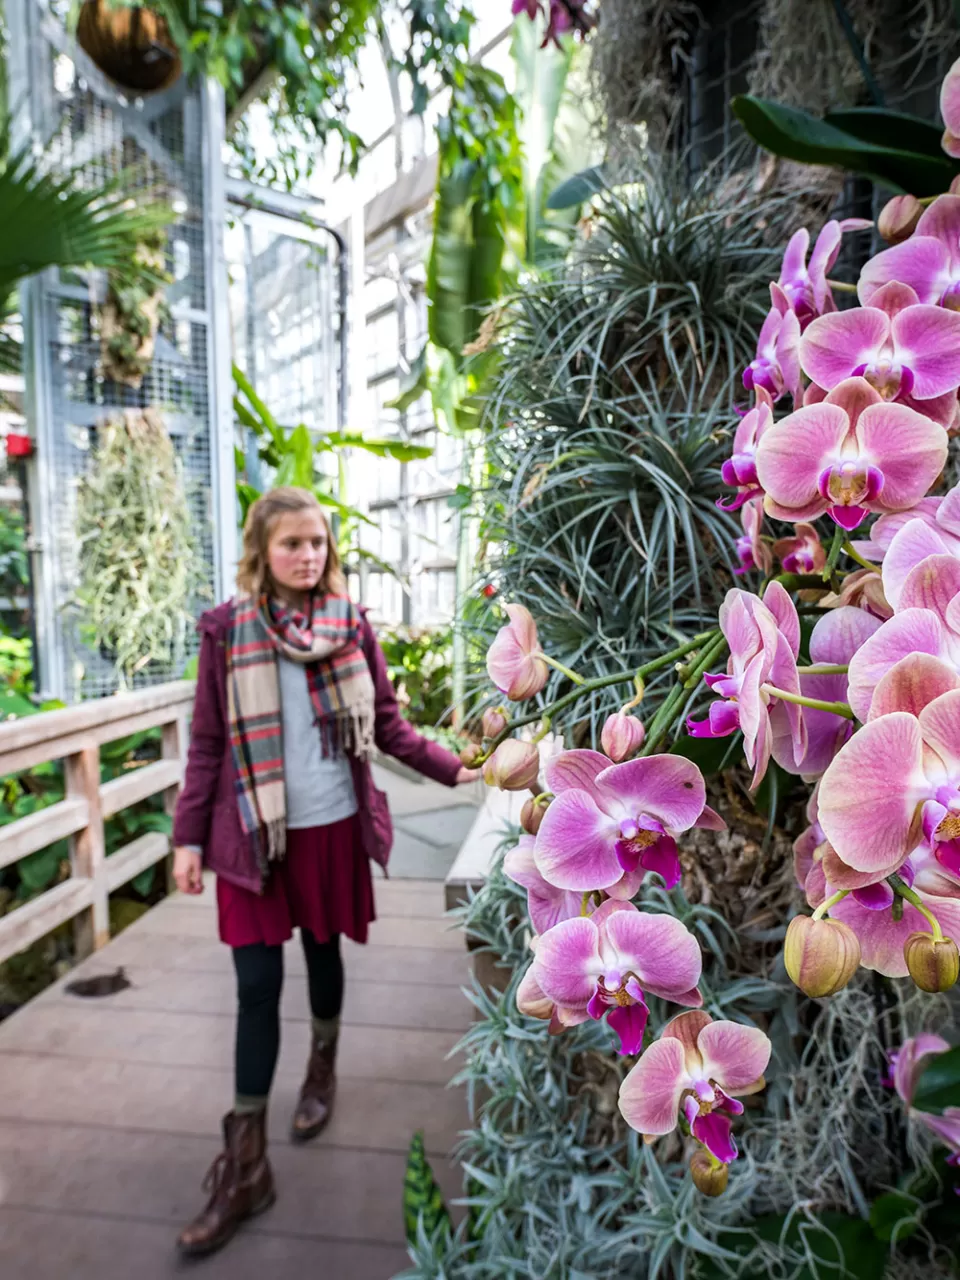 The 93-feet-tall Tropics house in the USBG Conservatory showcases tropical plants from around the world.